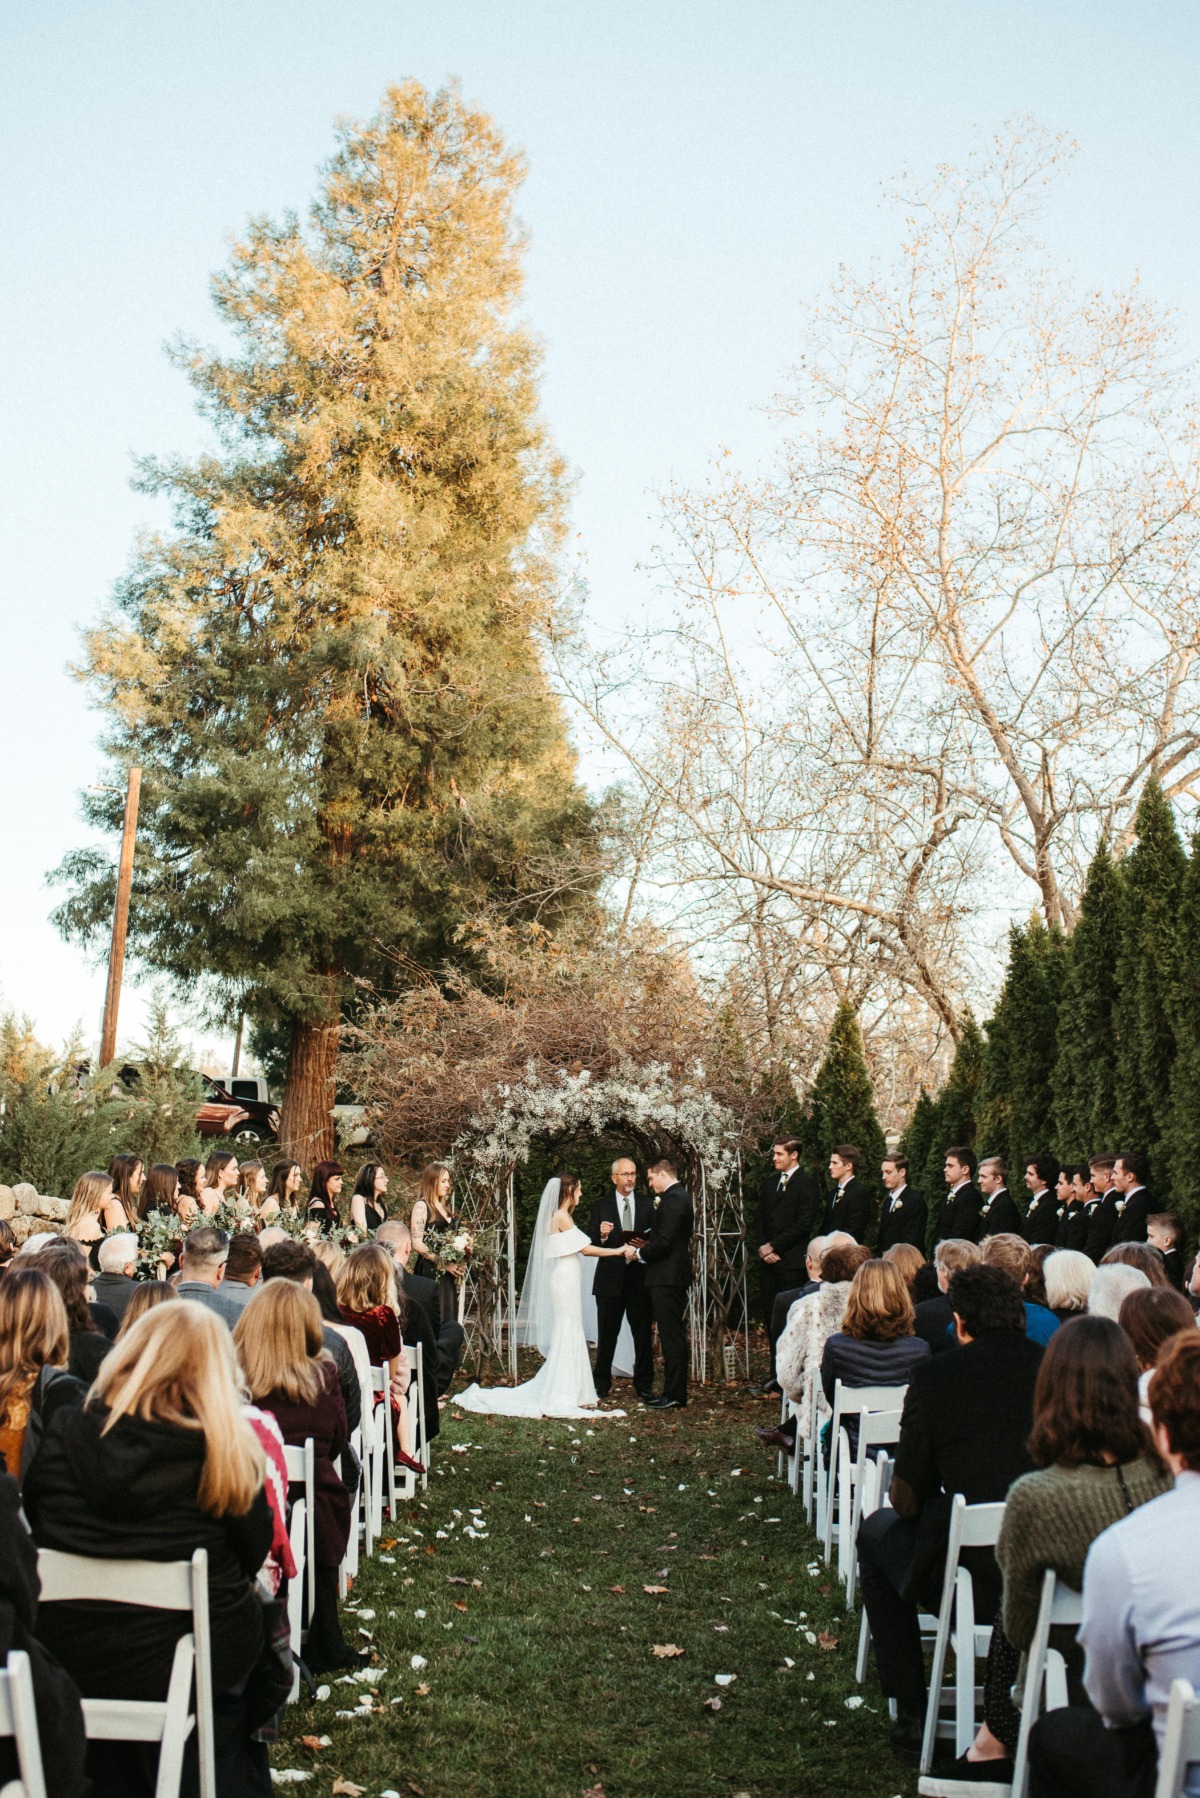 This Wedding At A California Mansion Only Cost 13K!